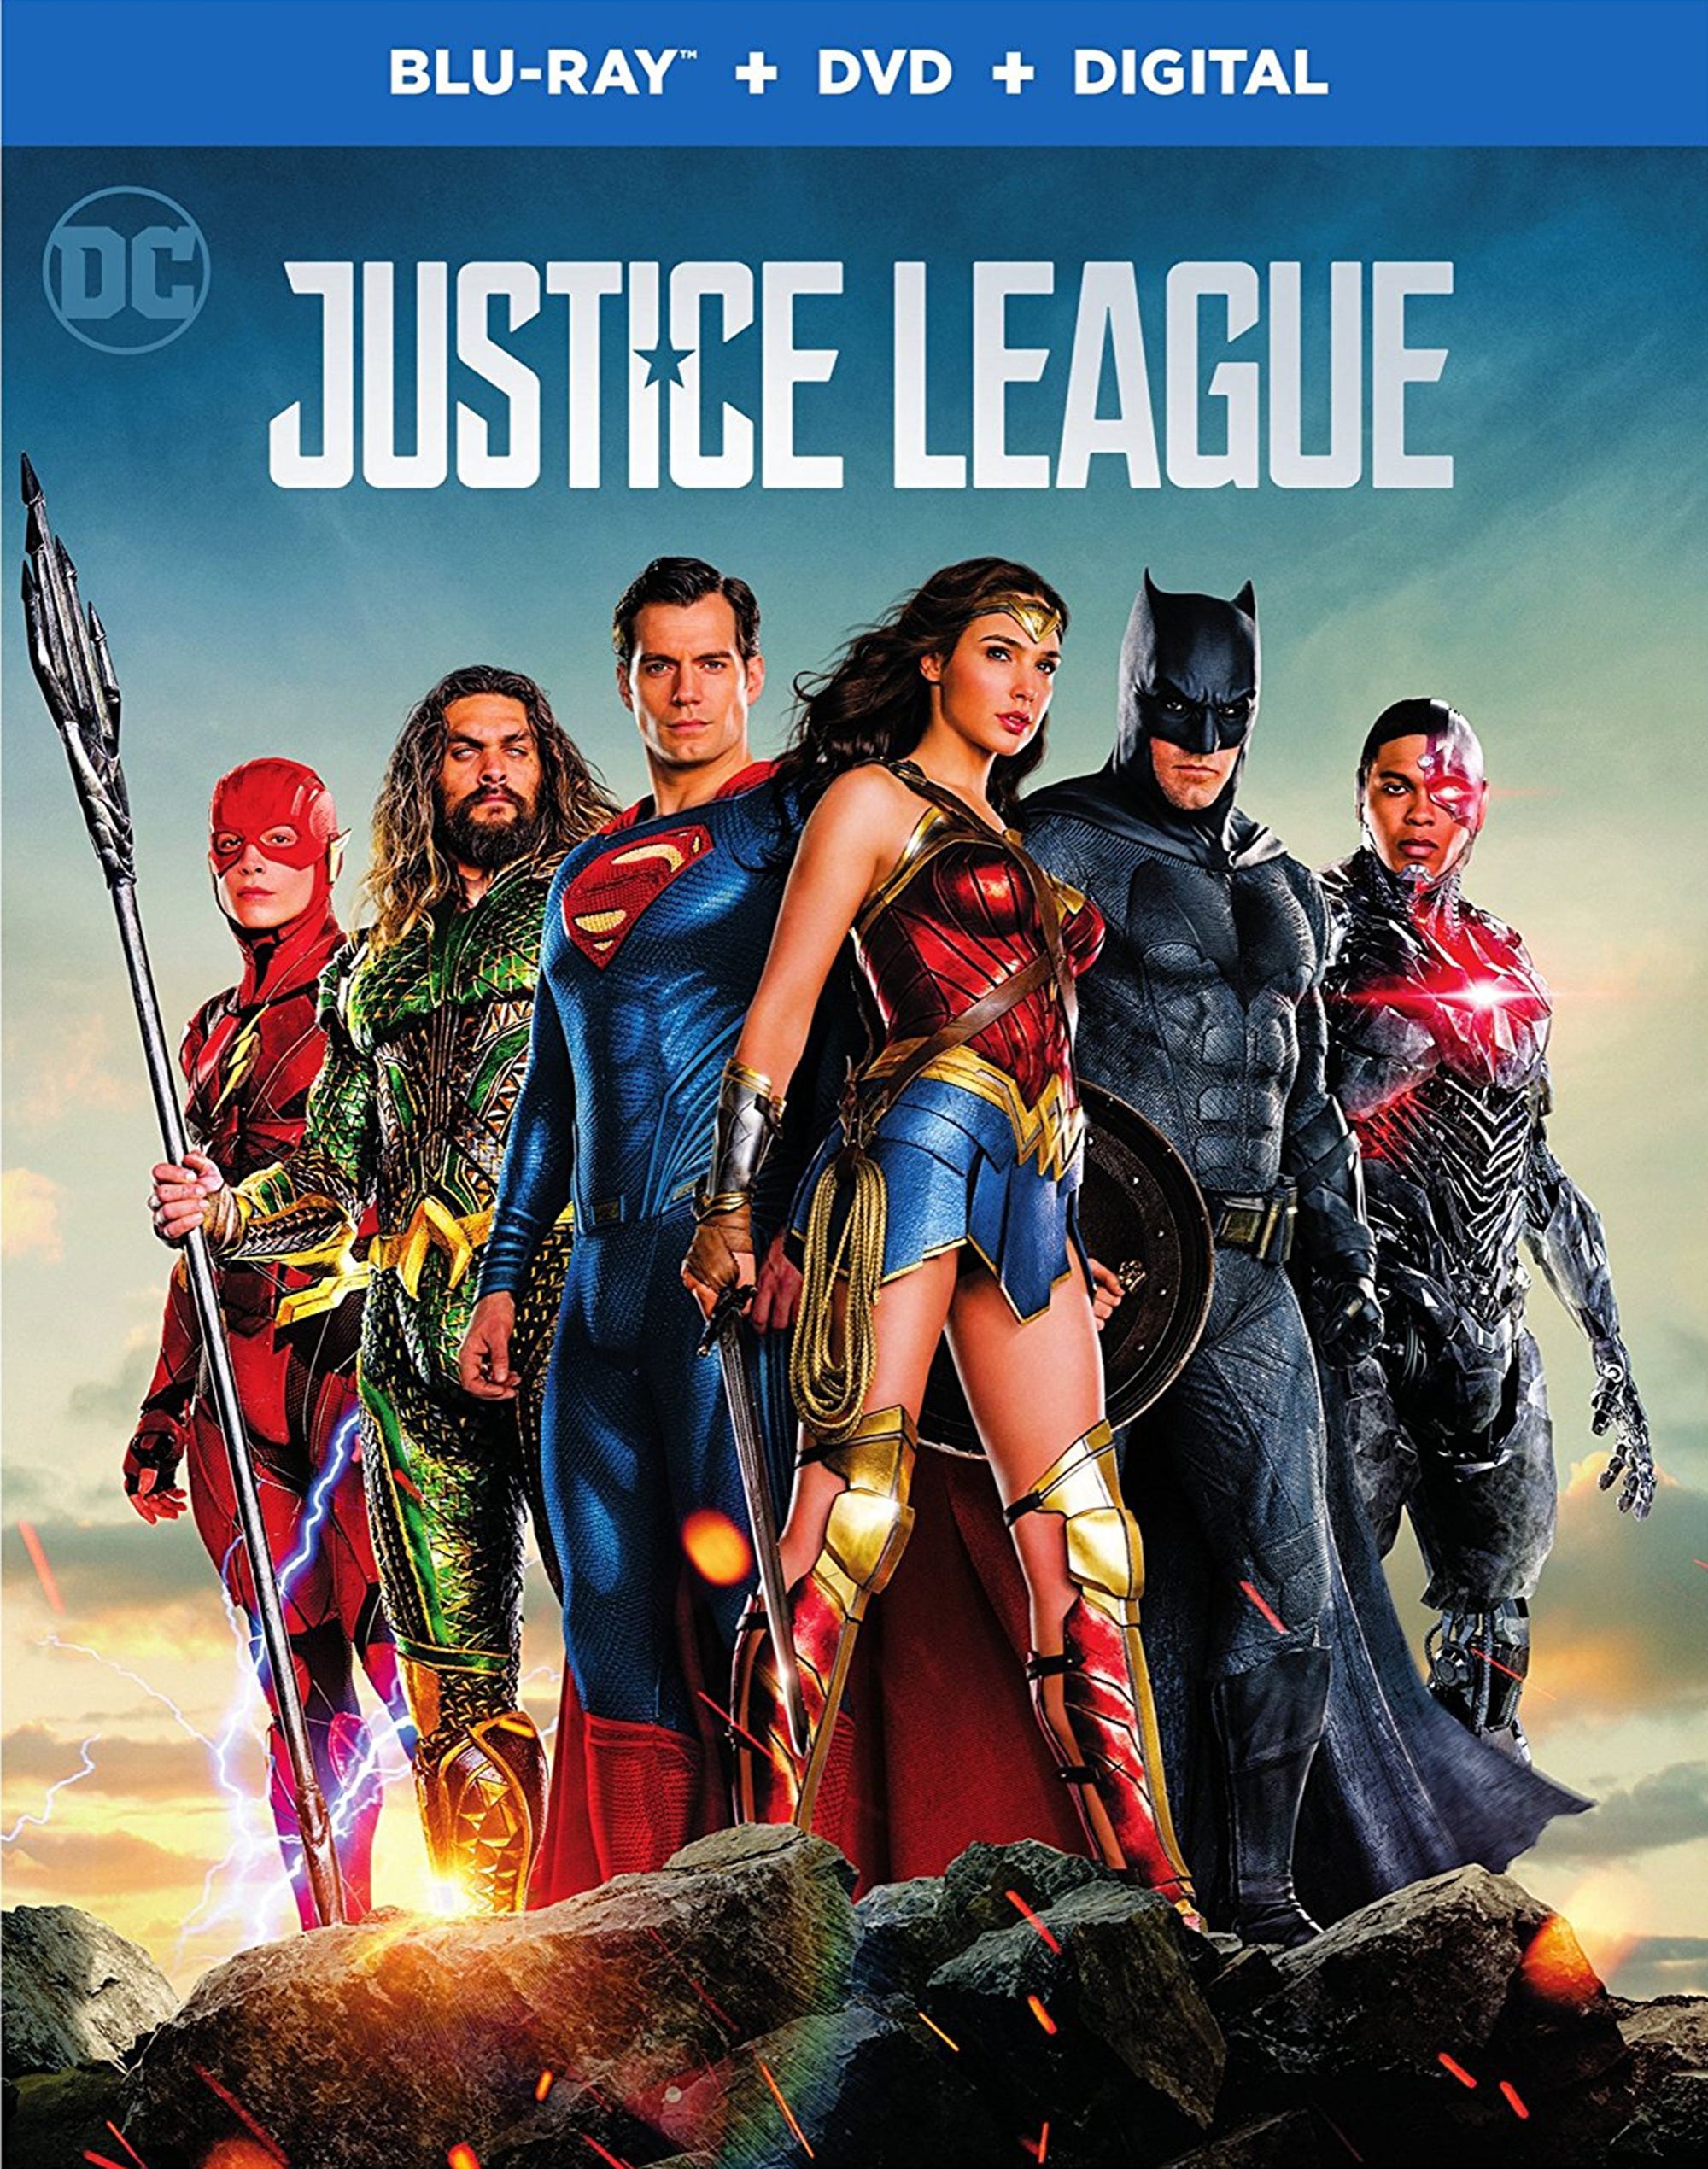 Justice League' Bluray heroic effort that scores